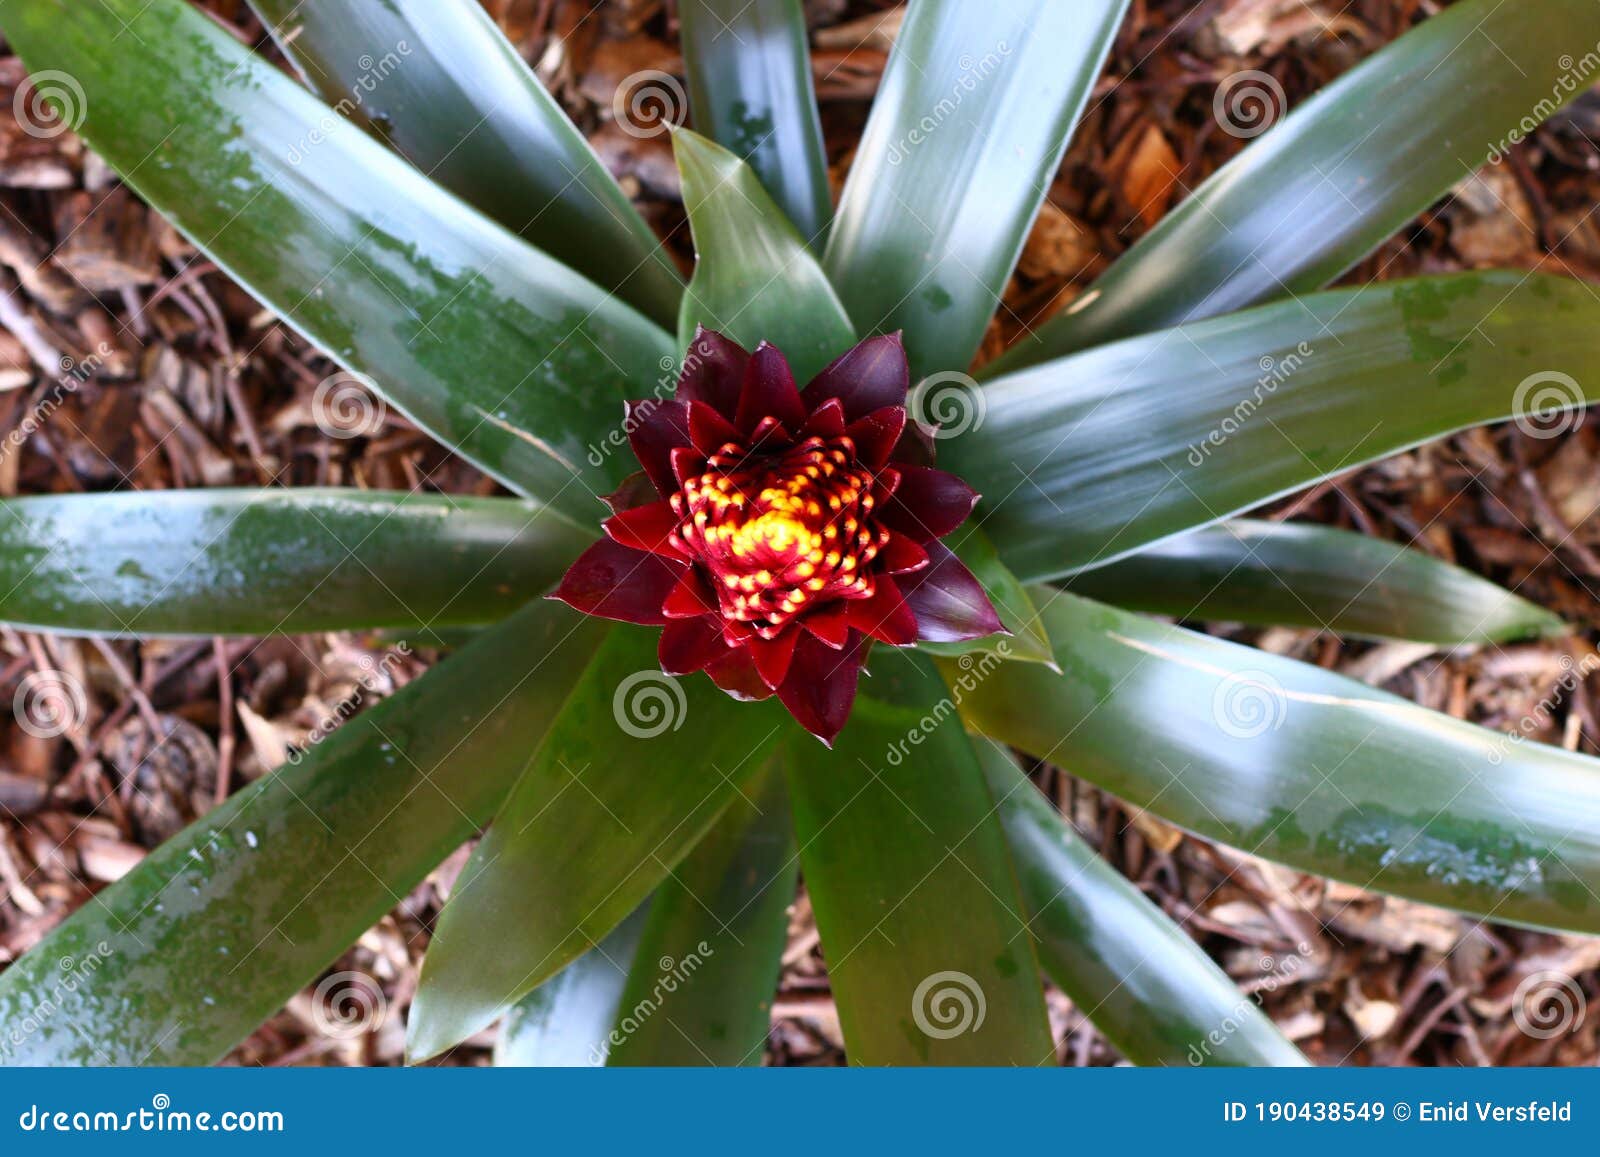 the maroon, red and yellow guzmania flower in the process of opening.